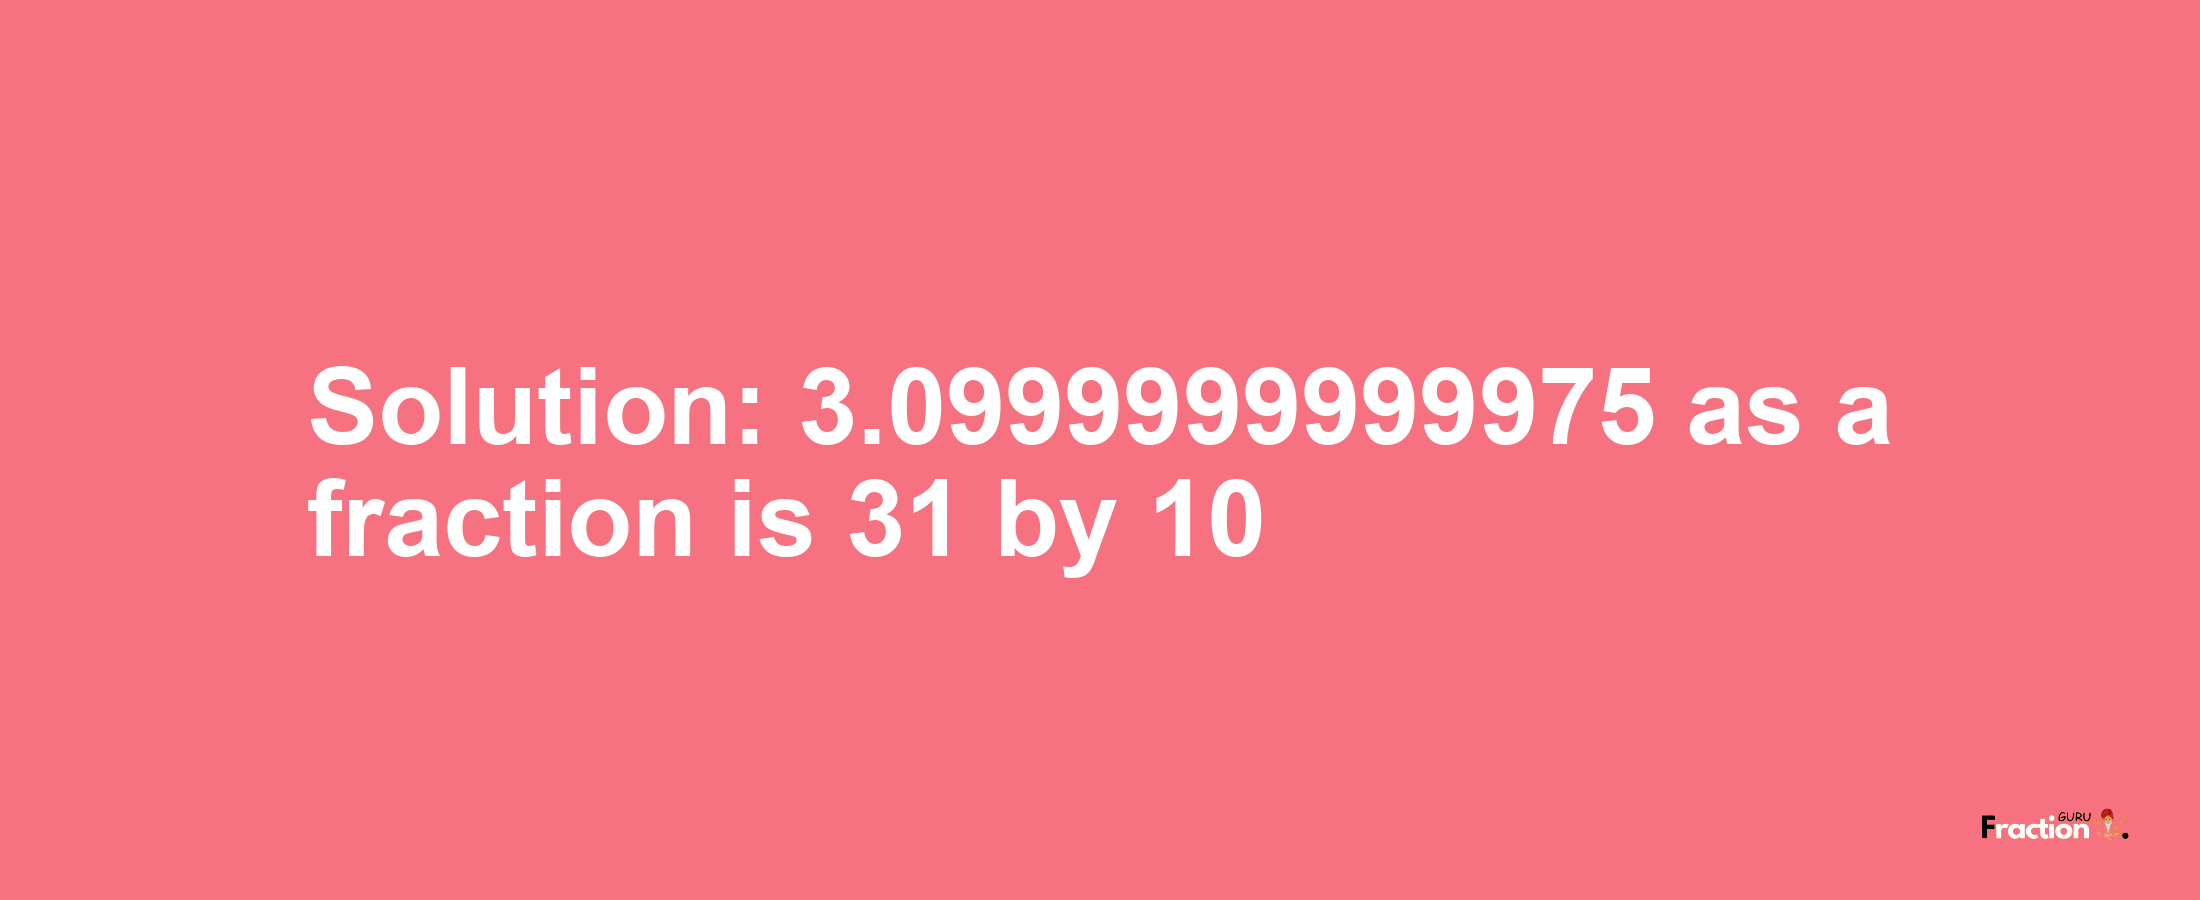 Solution:3.0999999999975 as a fraction is 31/10